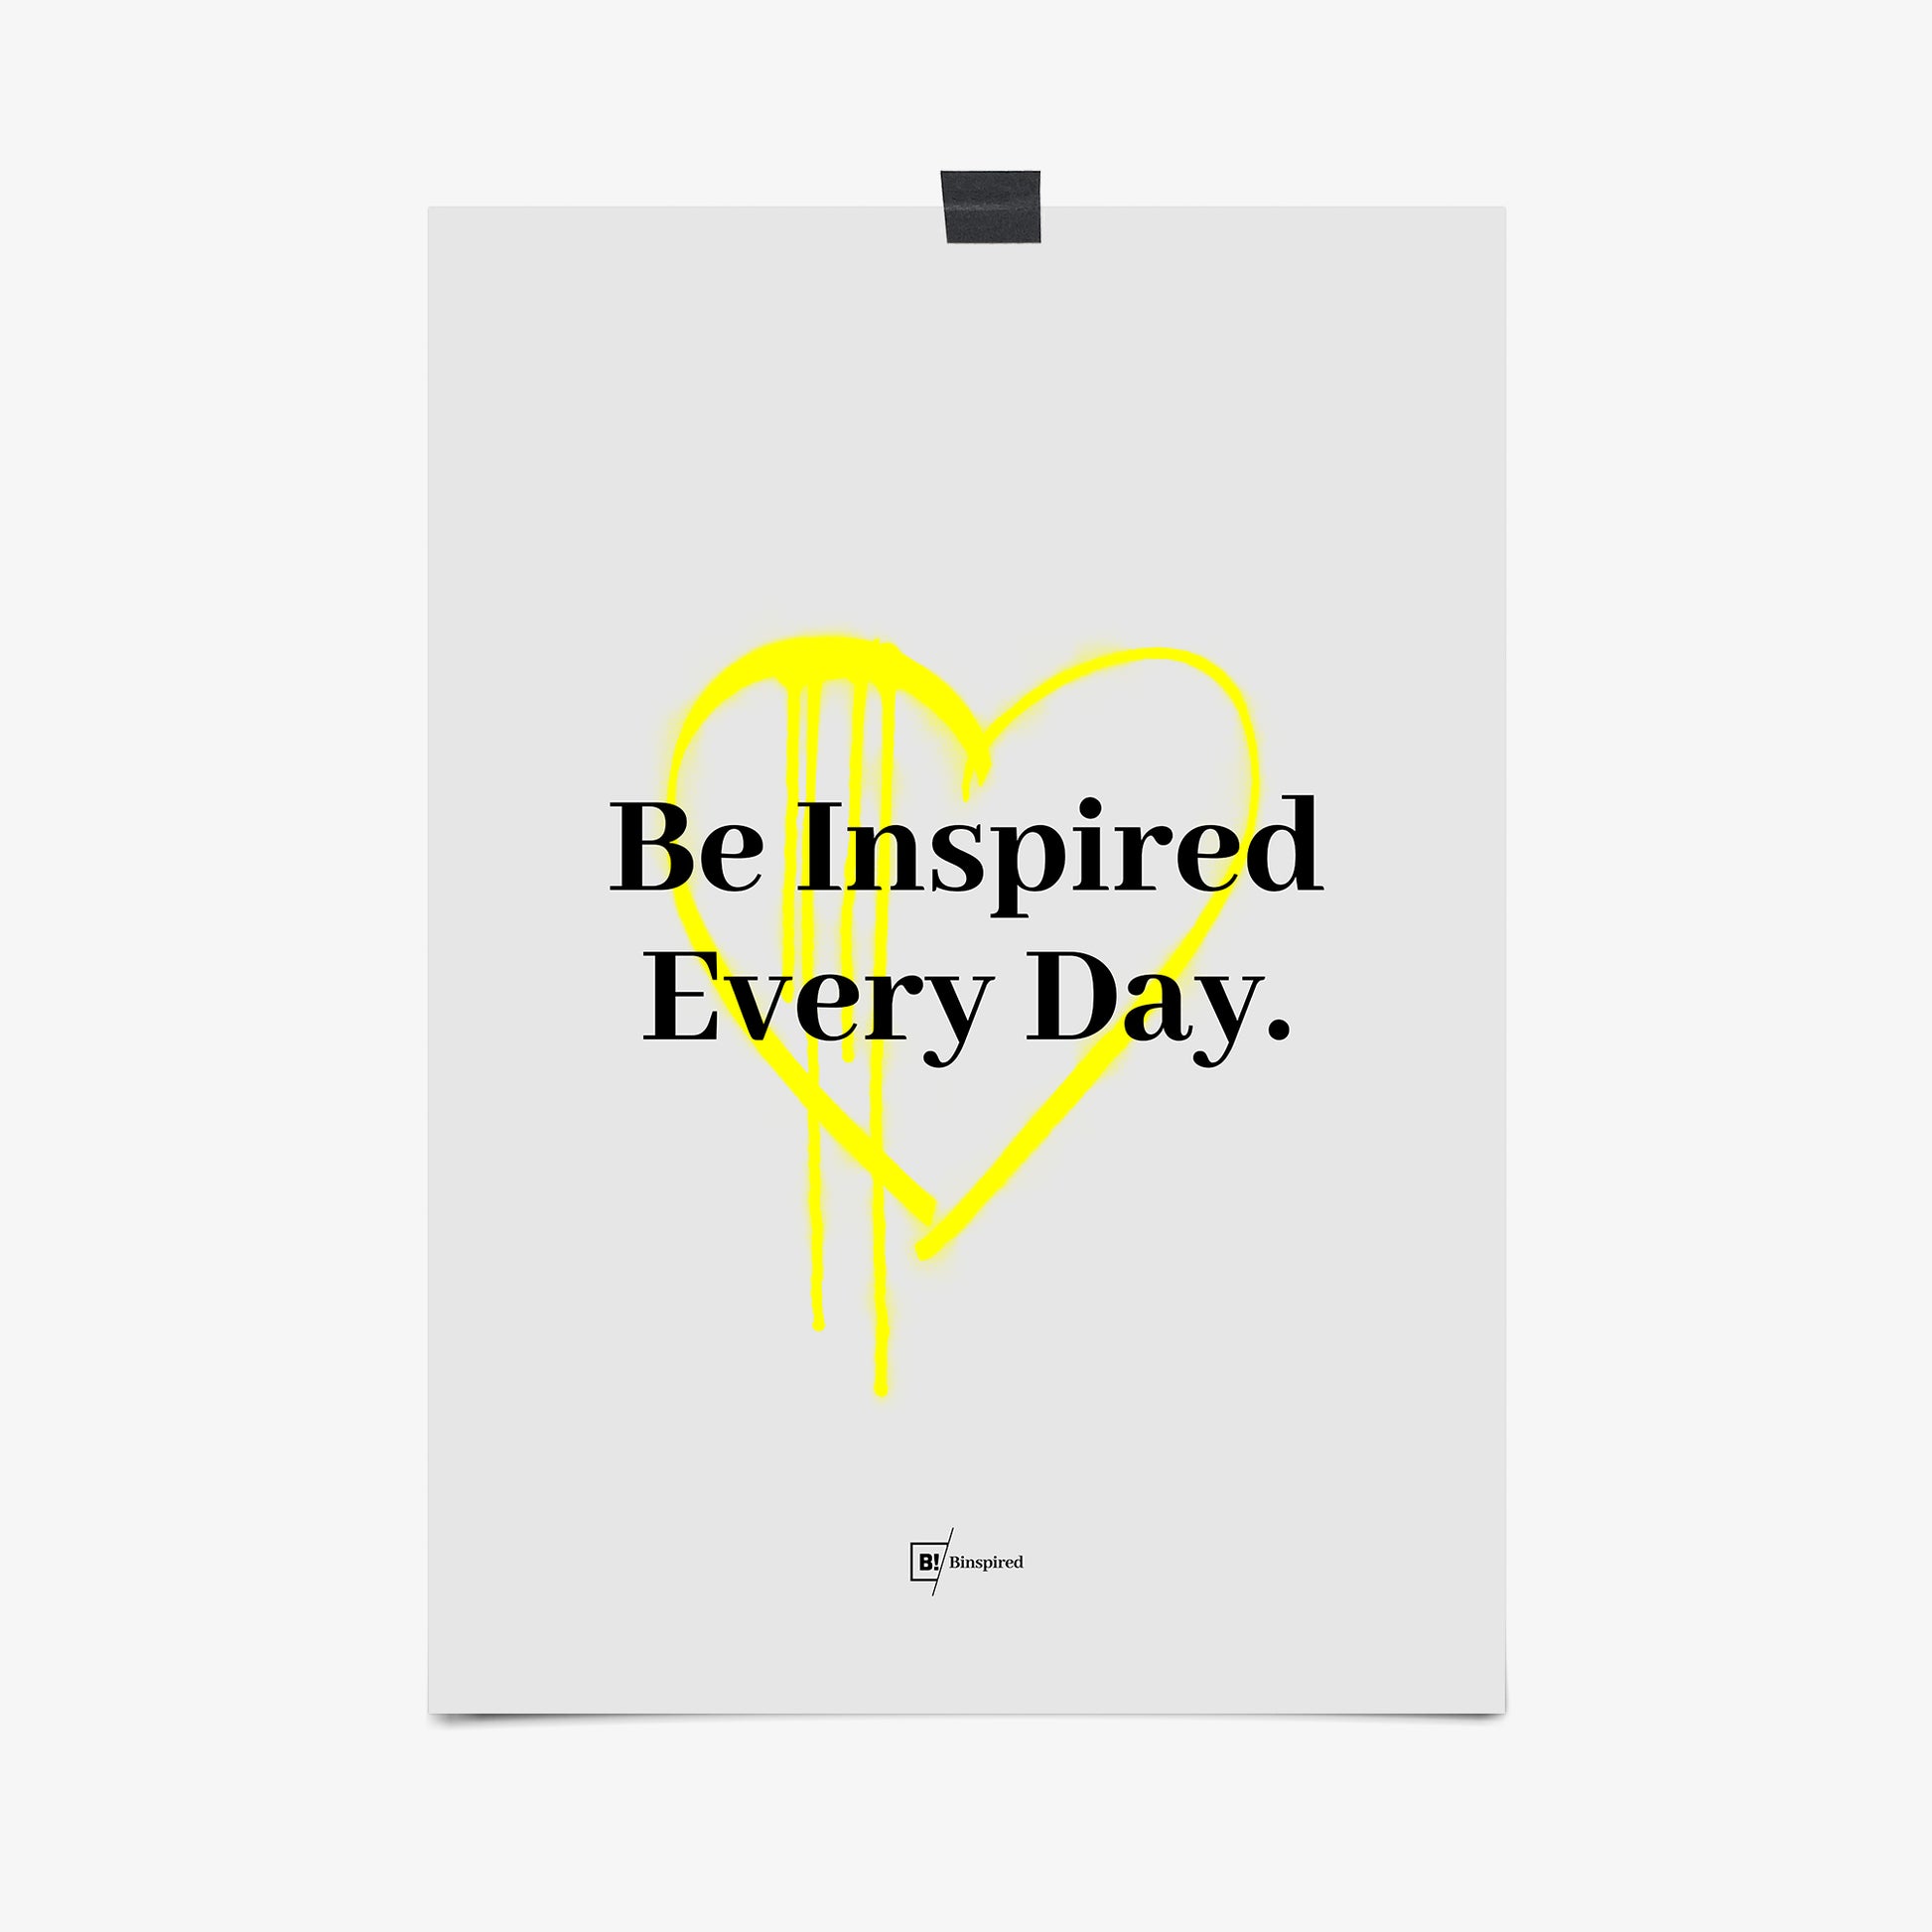 Be inspired by our "Be Inspired Every Day" quote art print! This artwork was printed using the giclée process on archival acid-free paper that captures its timeless beauty in every detail.